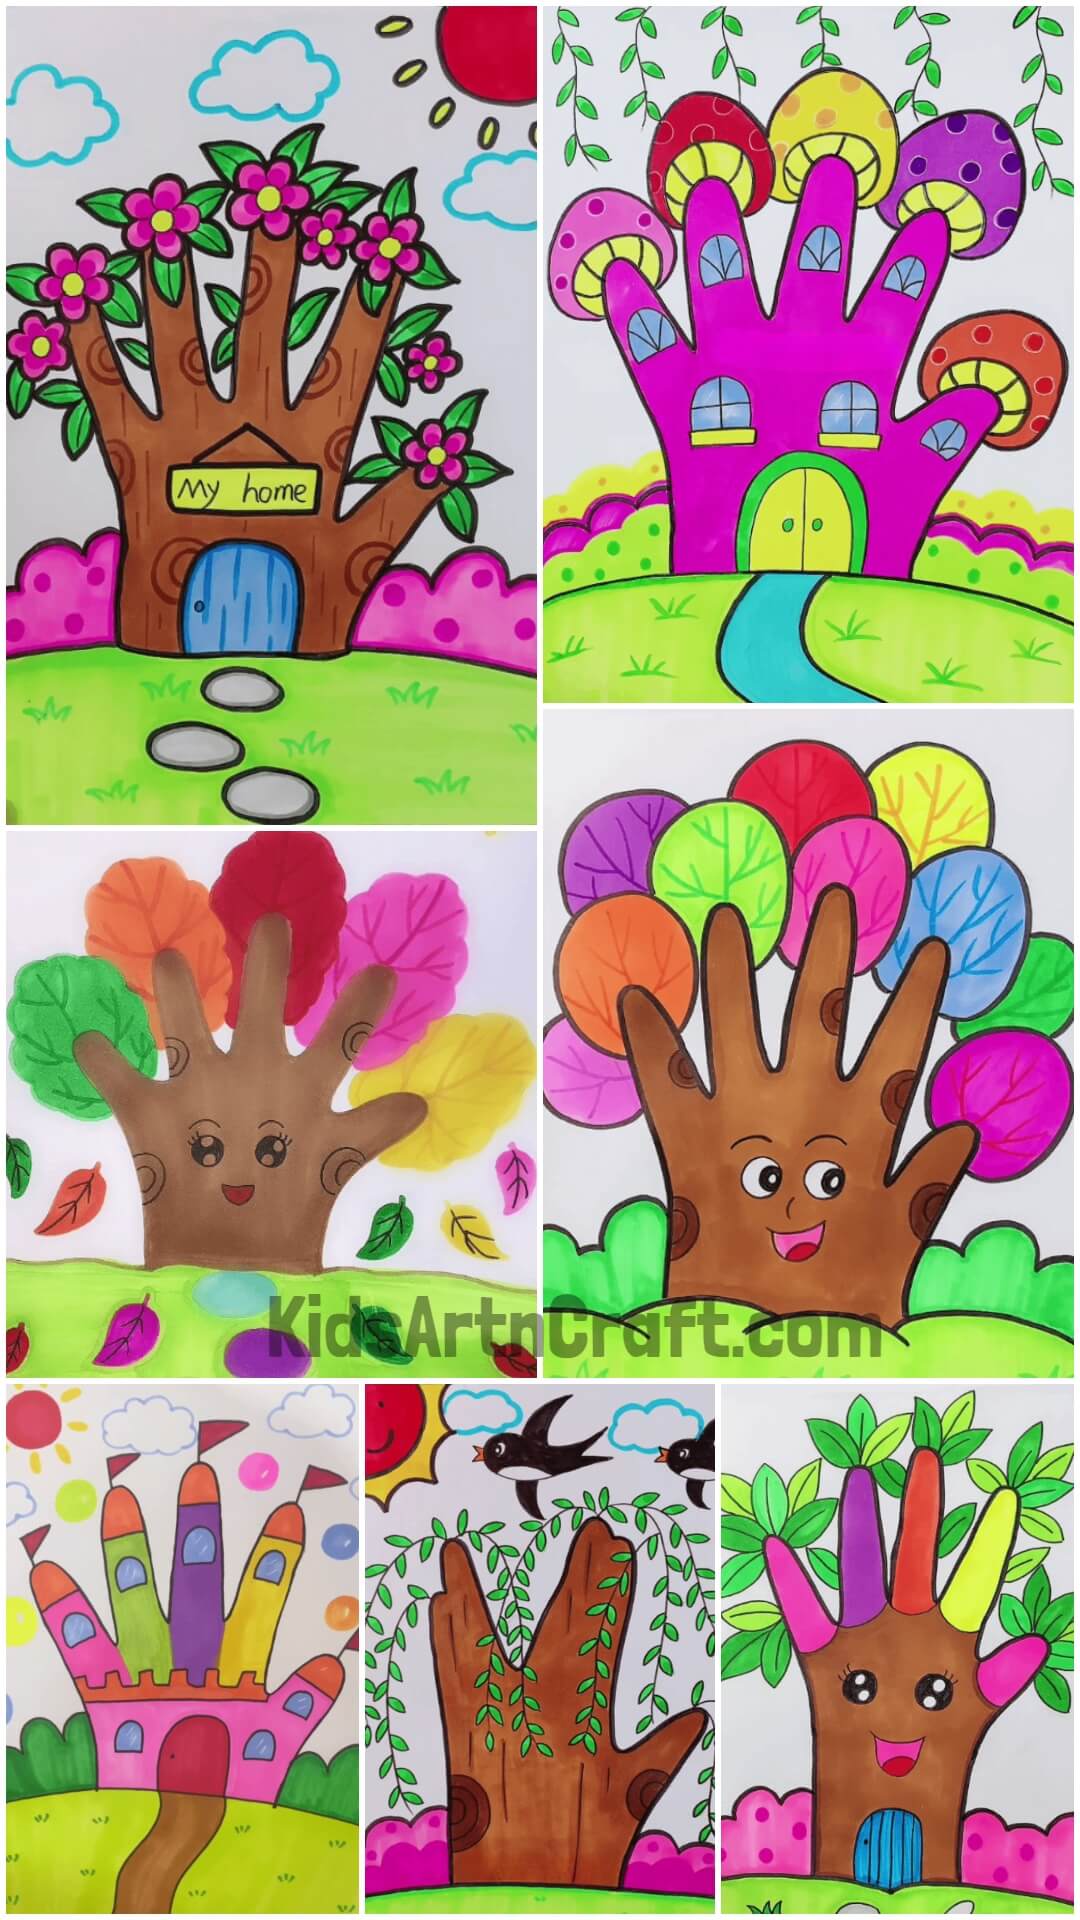 Hand Tree House Drawings For Kid